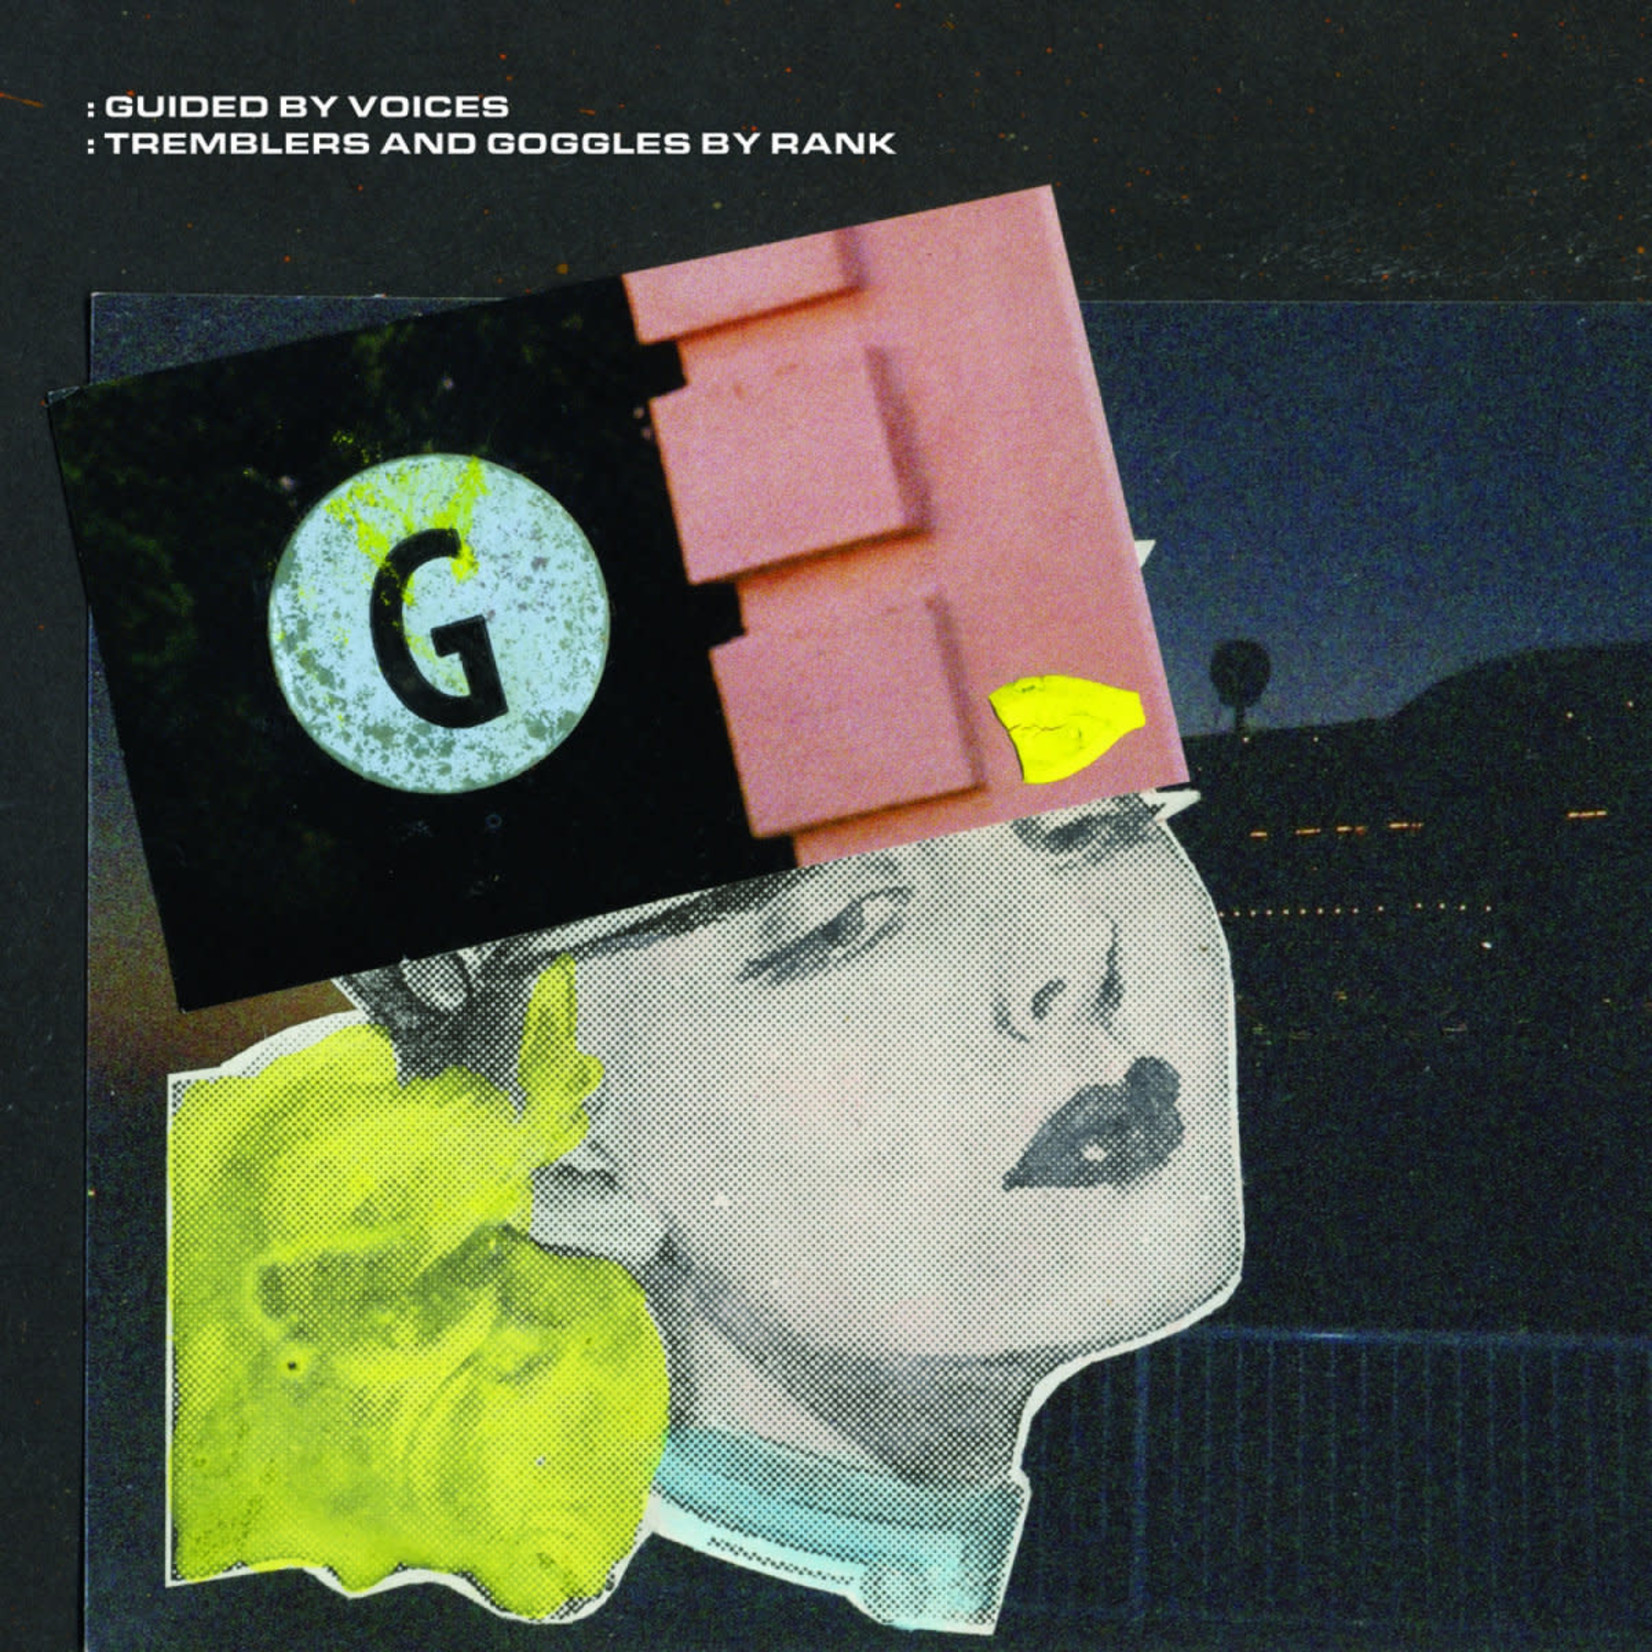 [New] Guided By Voices - Tremblers And Goggles By Rank